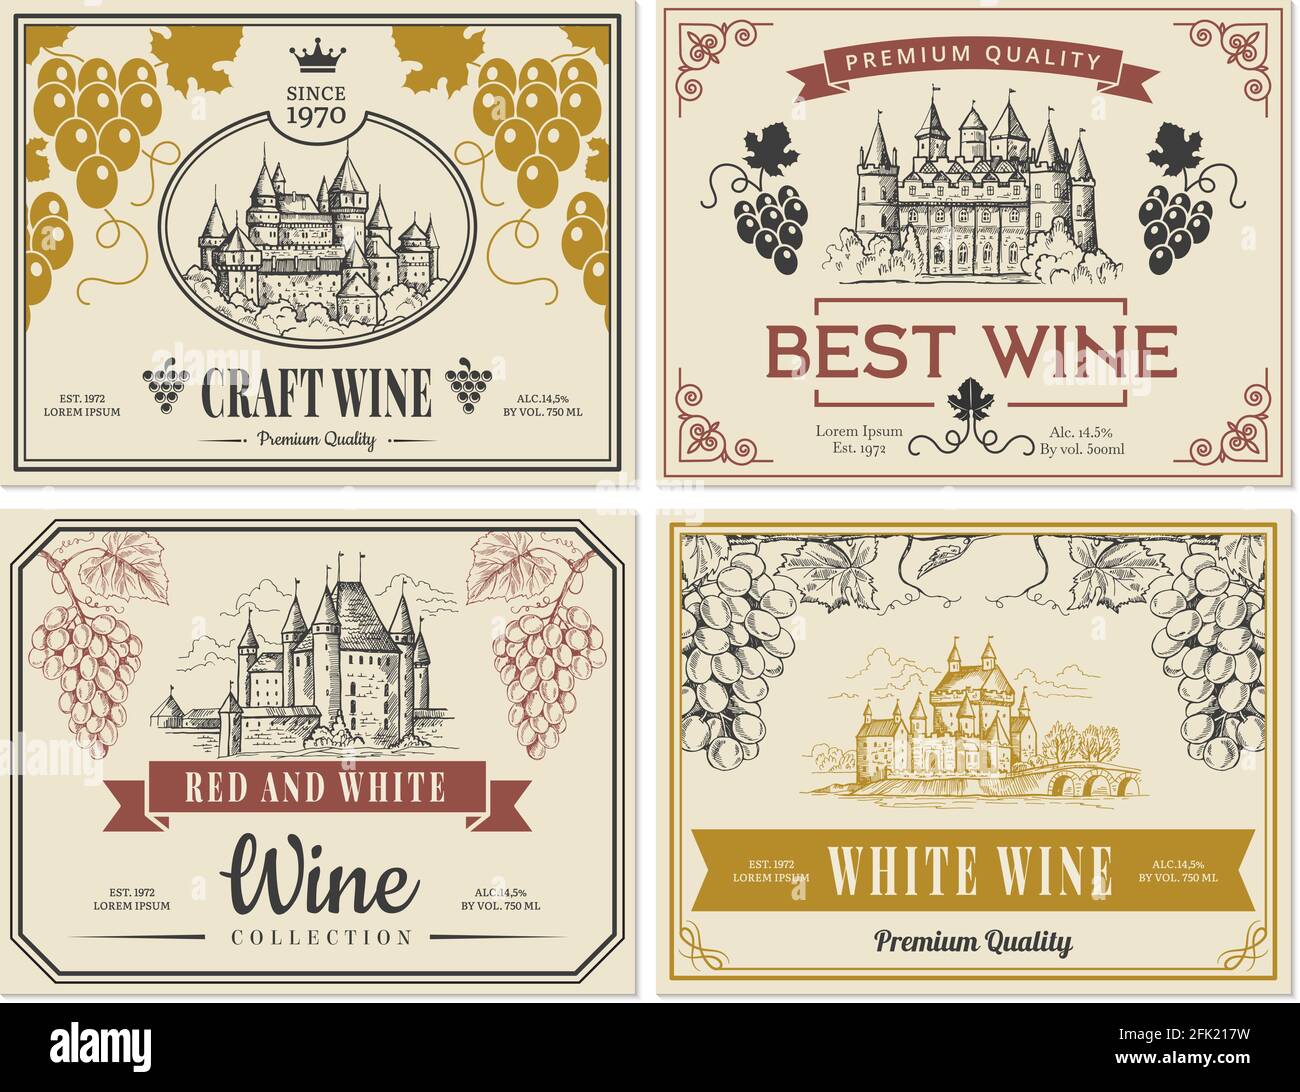 Wine labels. Vintage images for labels old medieval castles and towers architectural objects vector template Stock Vector